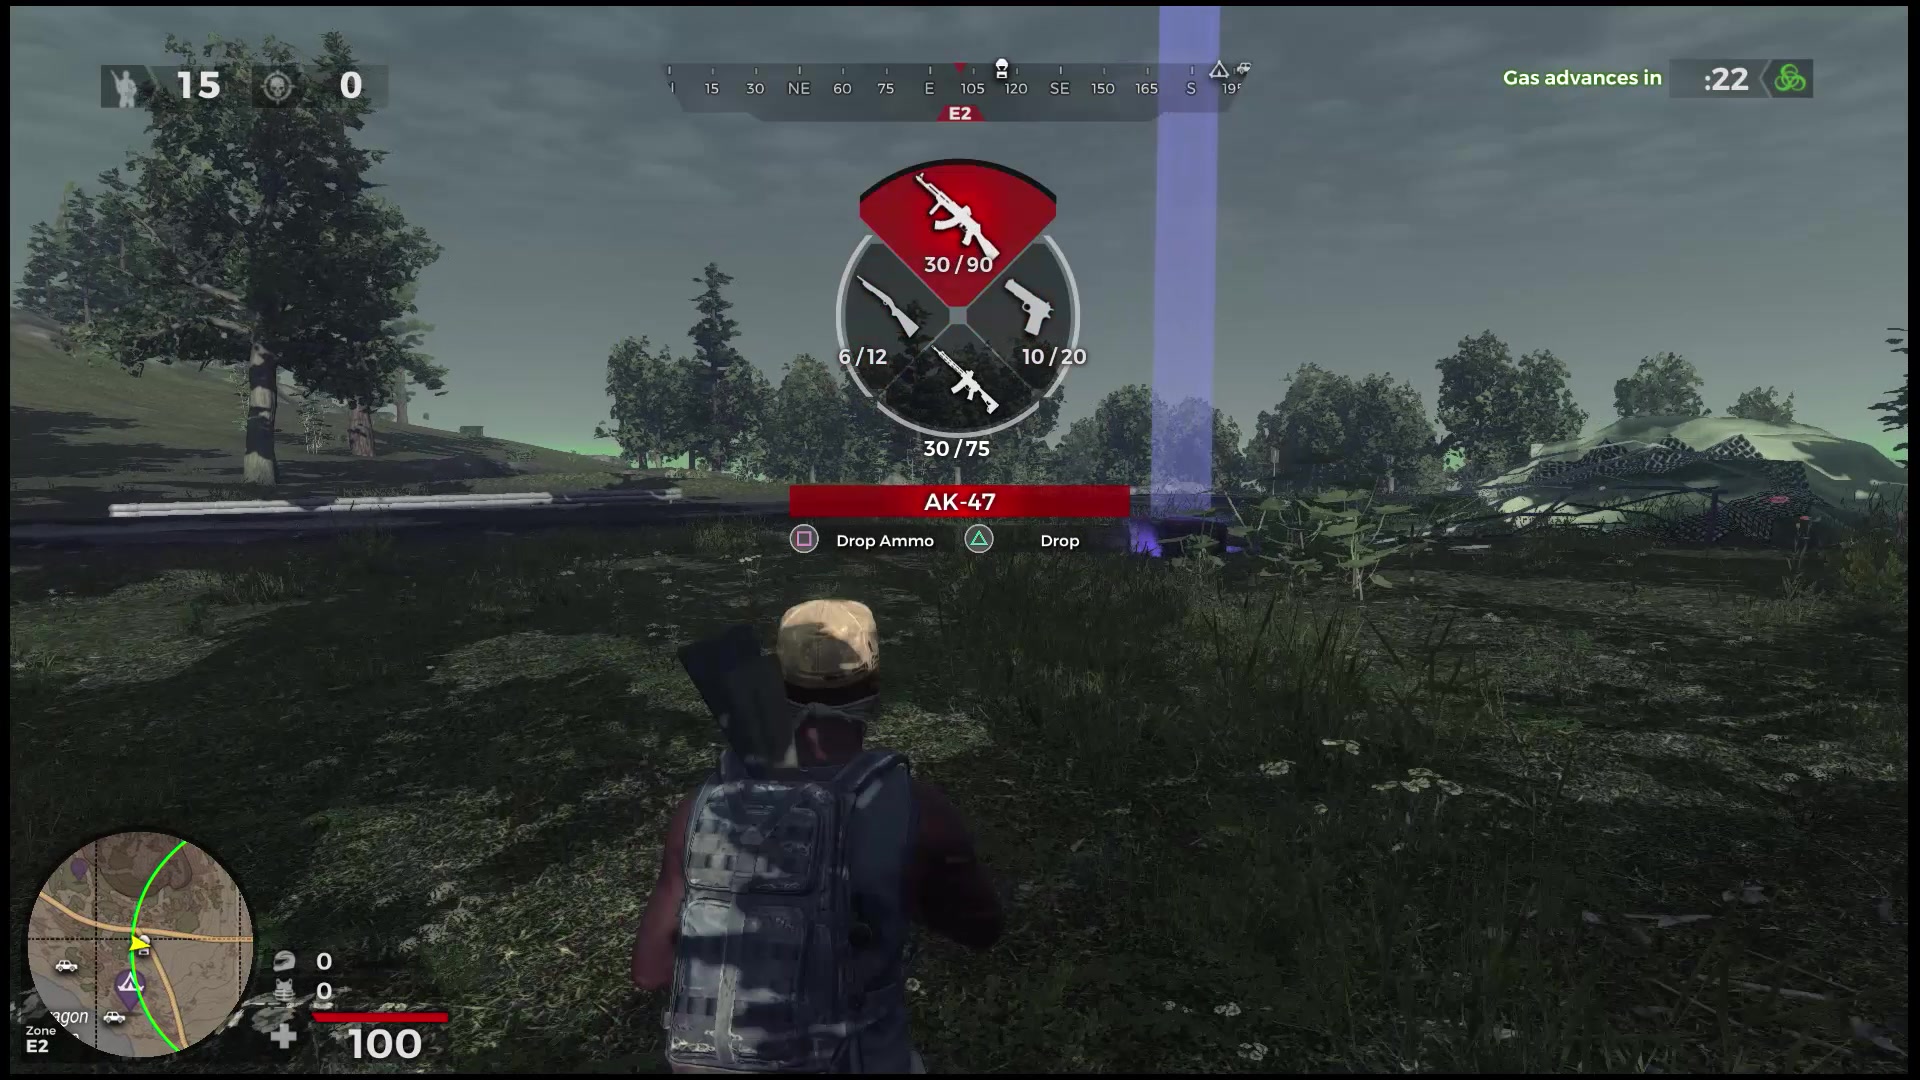 Gepard sang triathlete H1Z1 Open Beta is Now Live on PS4! | Daybreak Game Company